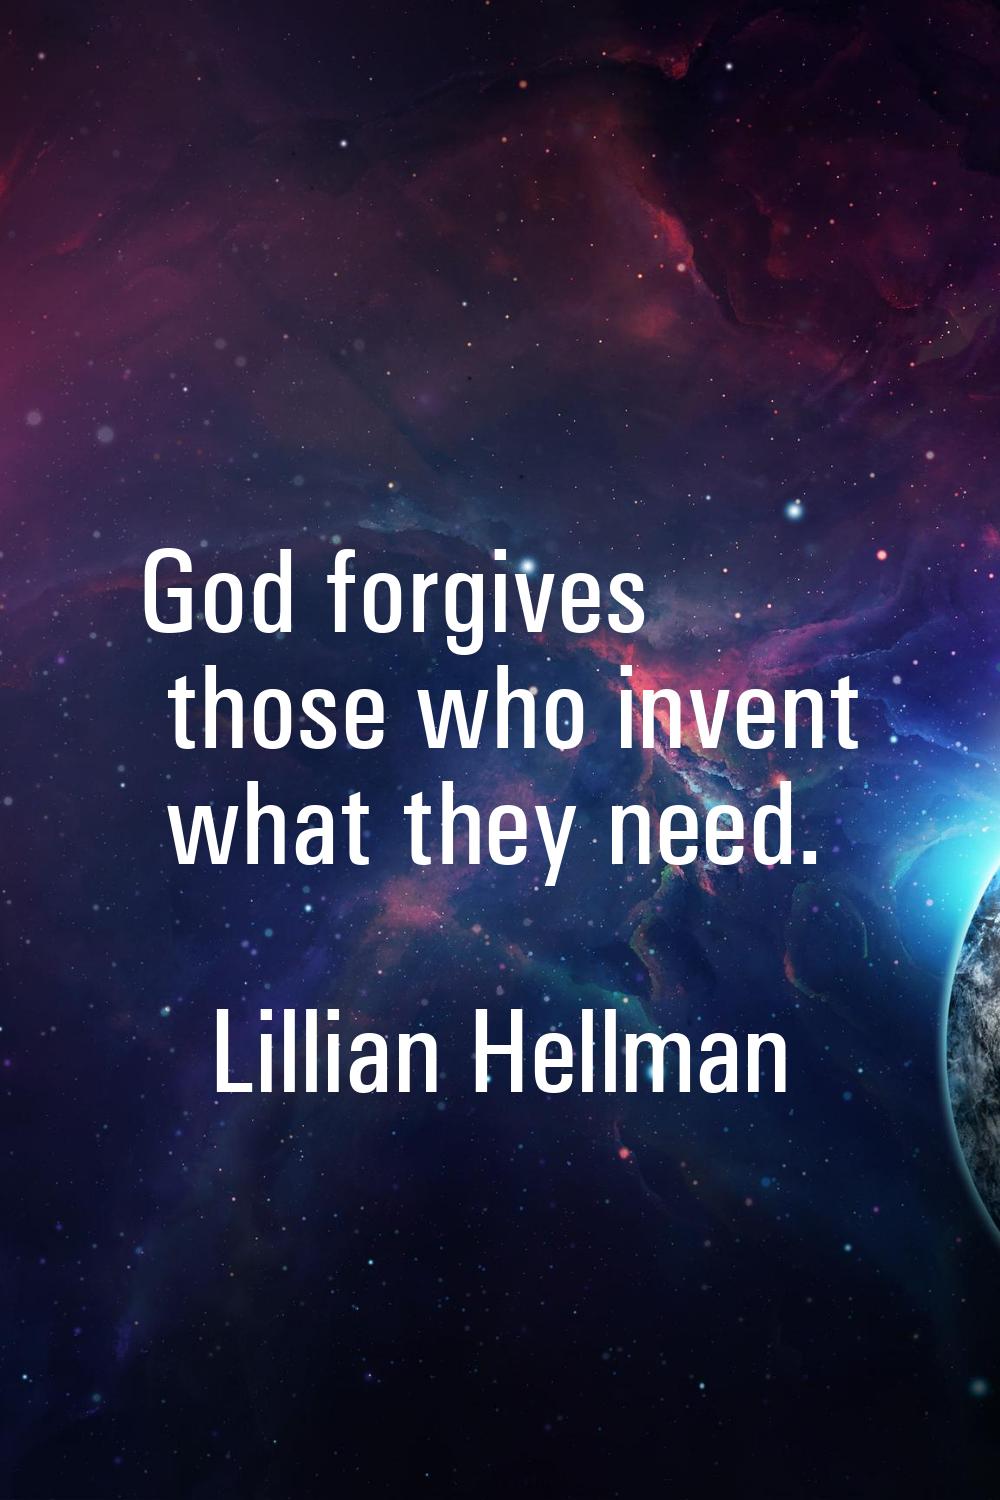 God forgives those who invent what they need.